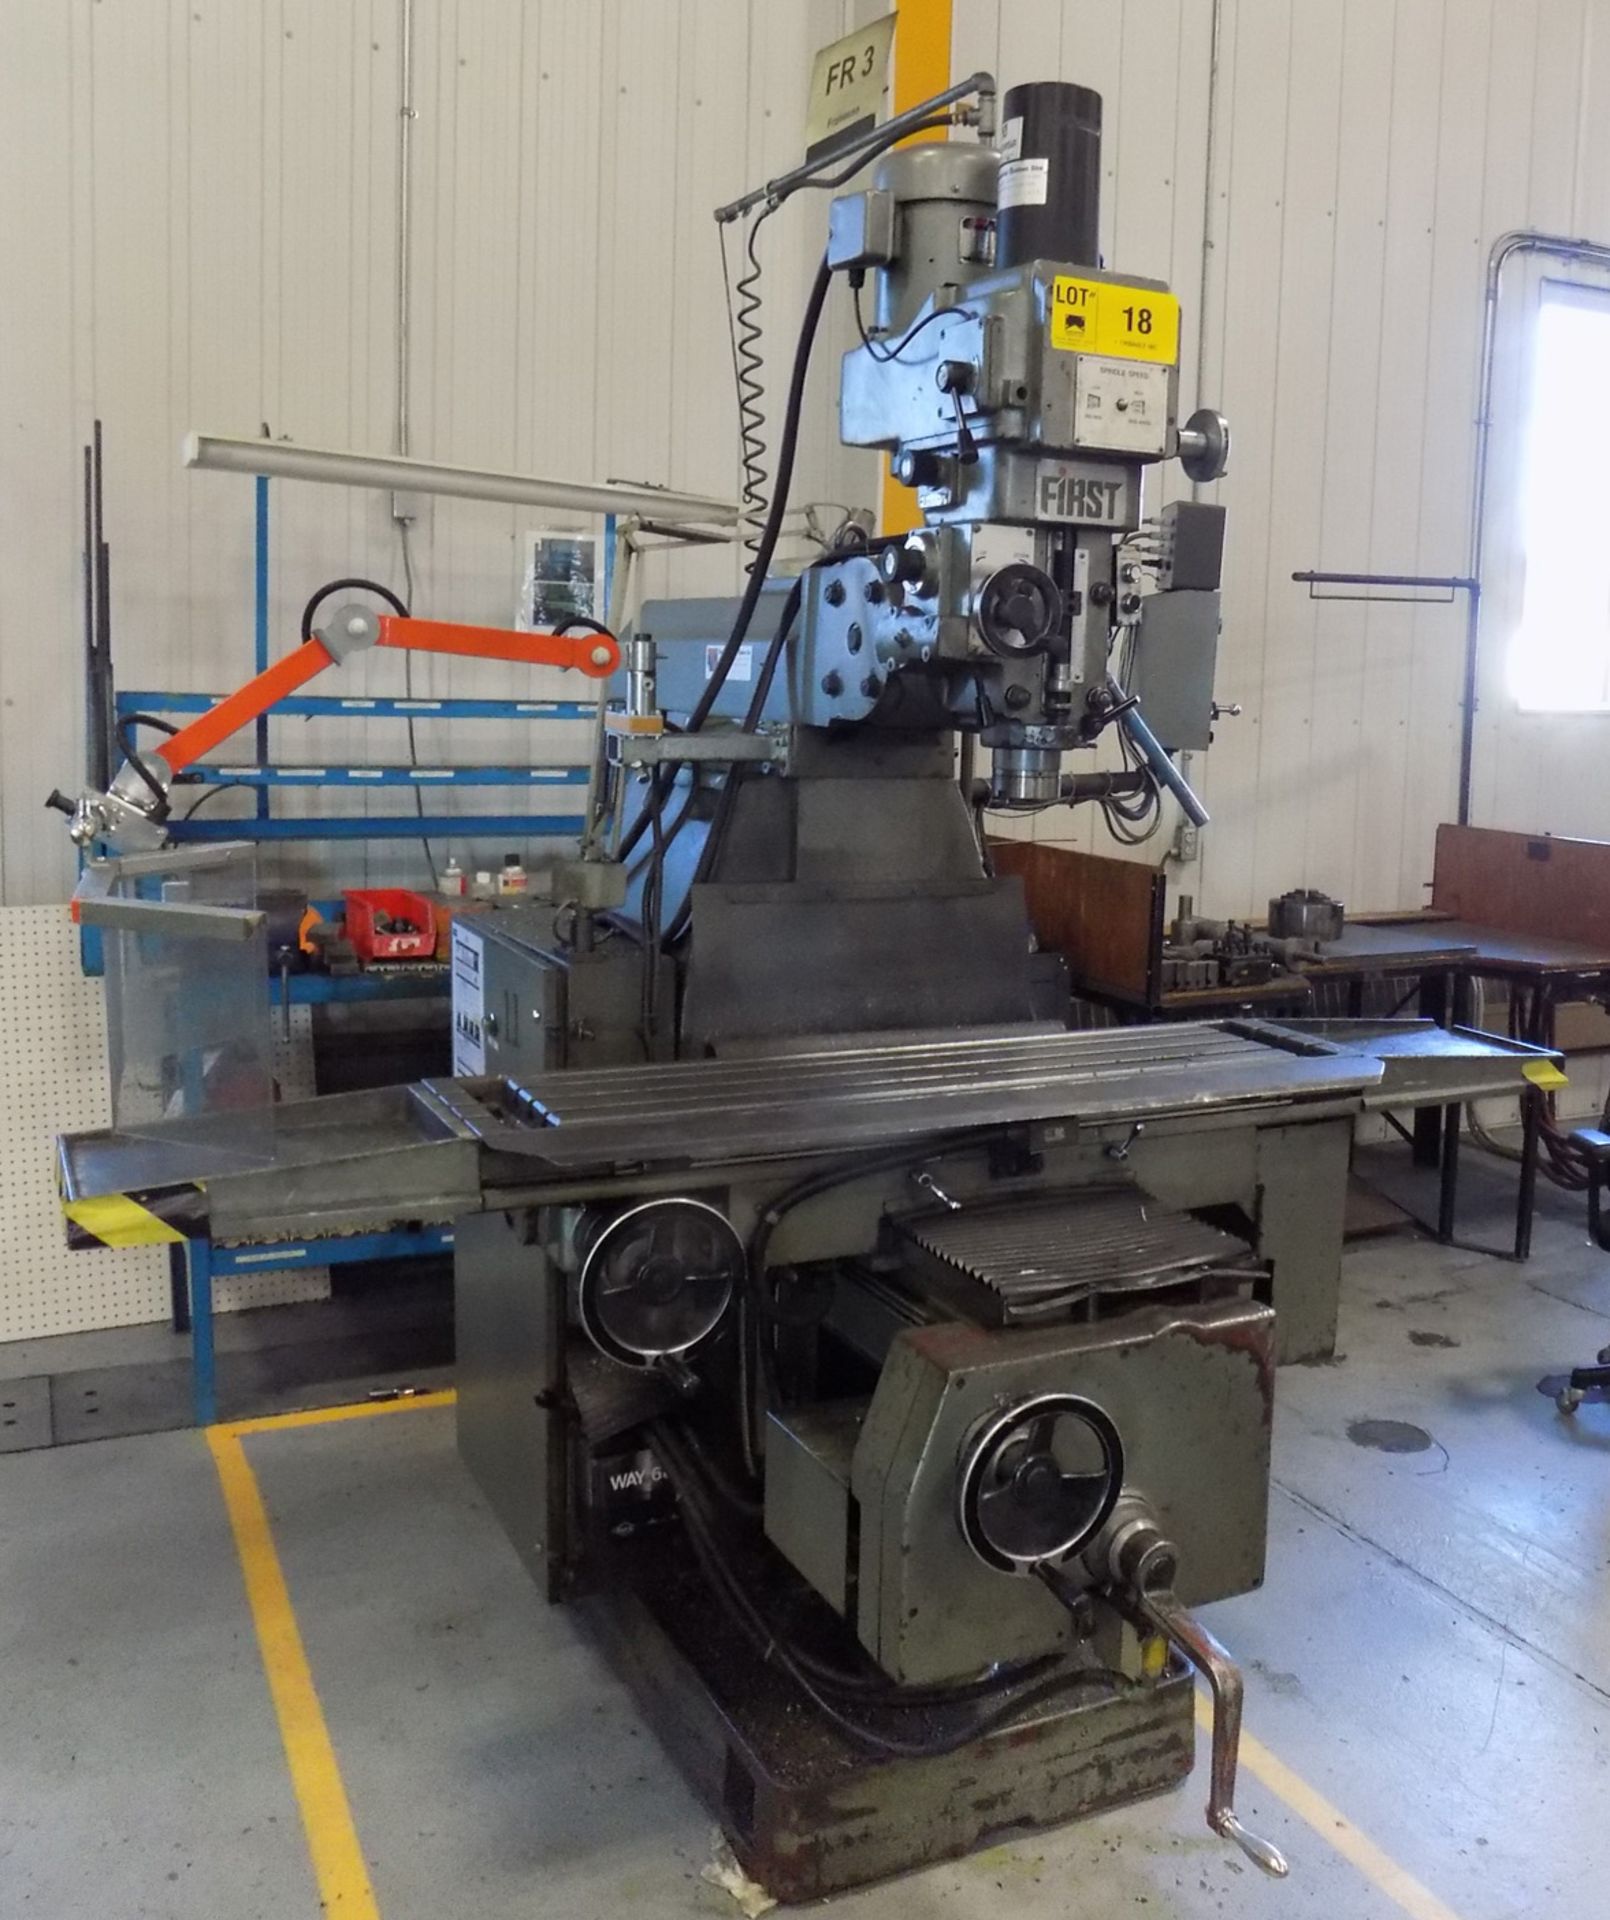 FIRST LC205 VSDX VERTICAL TURRET MILLING MACHINE WITH 51"X11" TABLE, SPEEDS TO 4500 RPM, MITUTOYO - Image 3 of 7